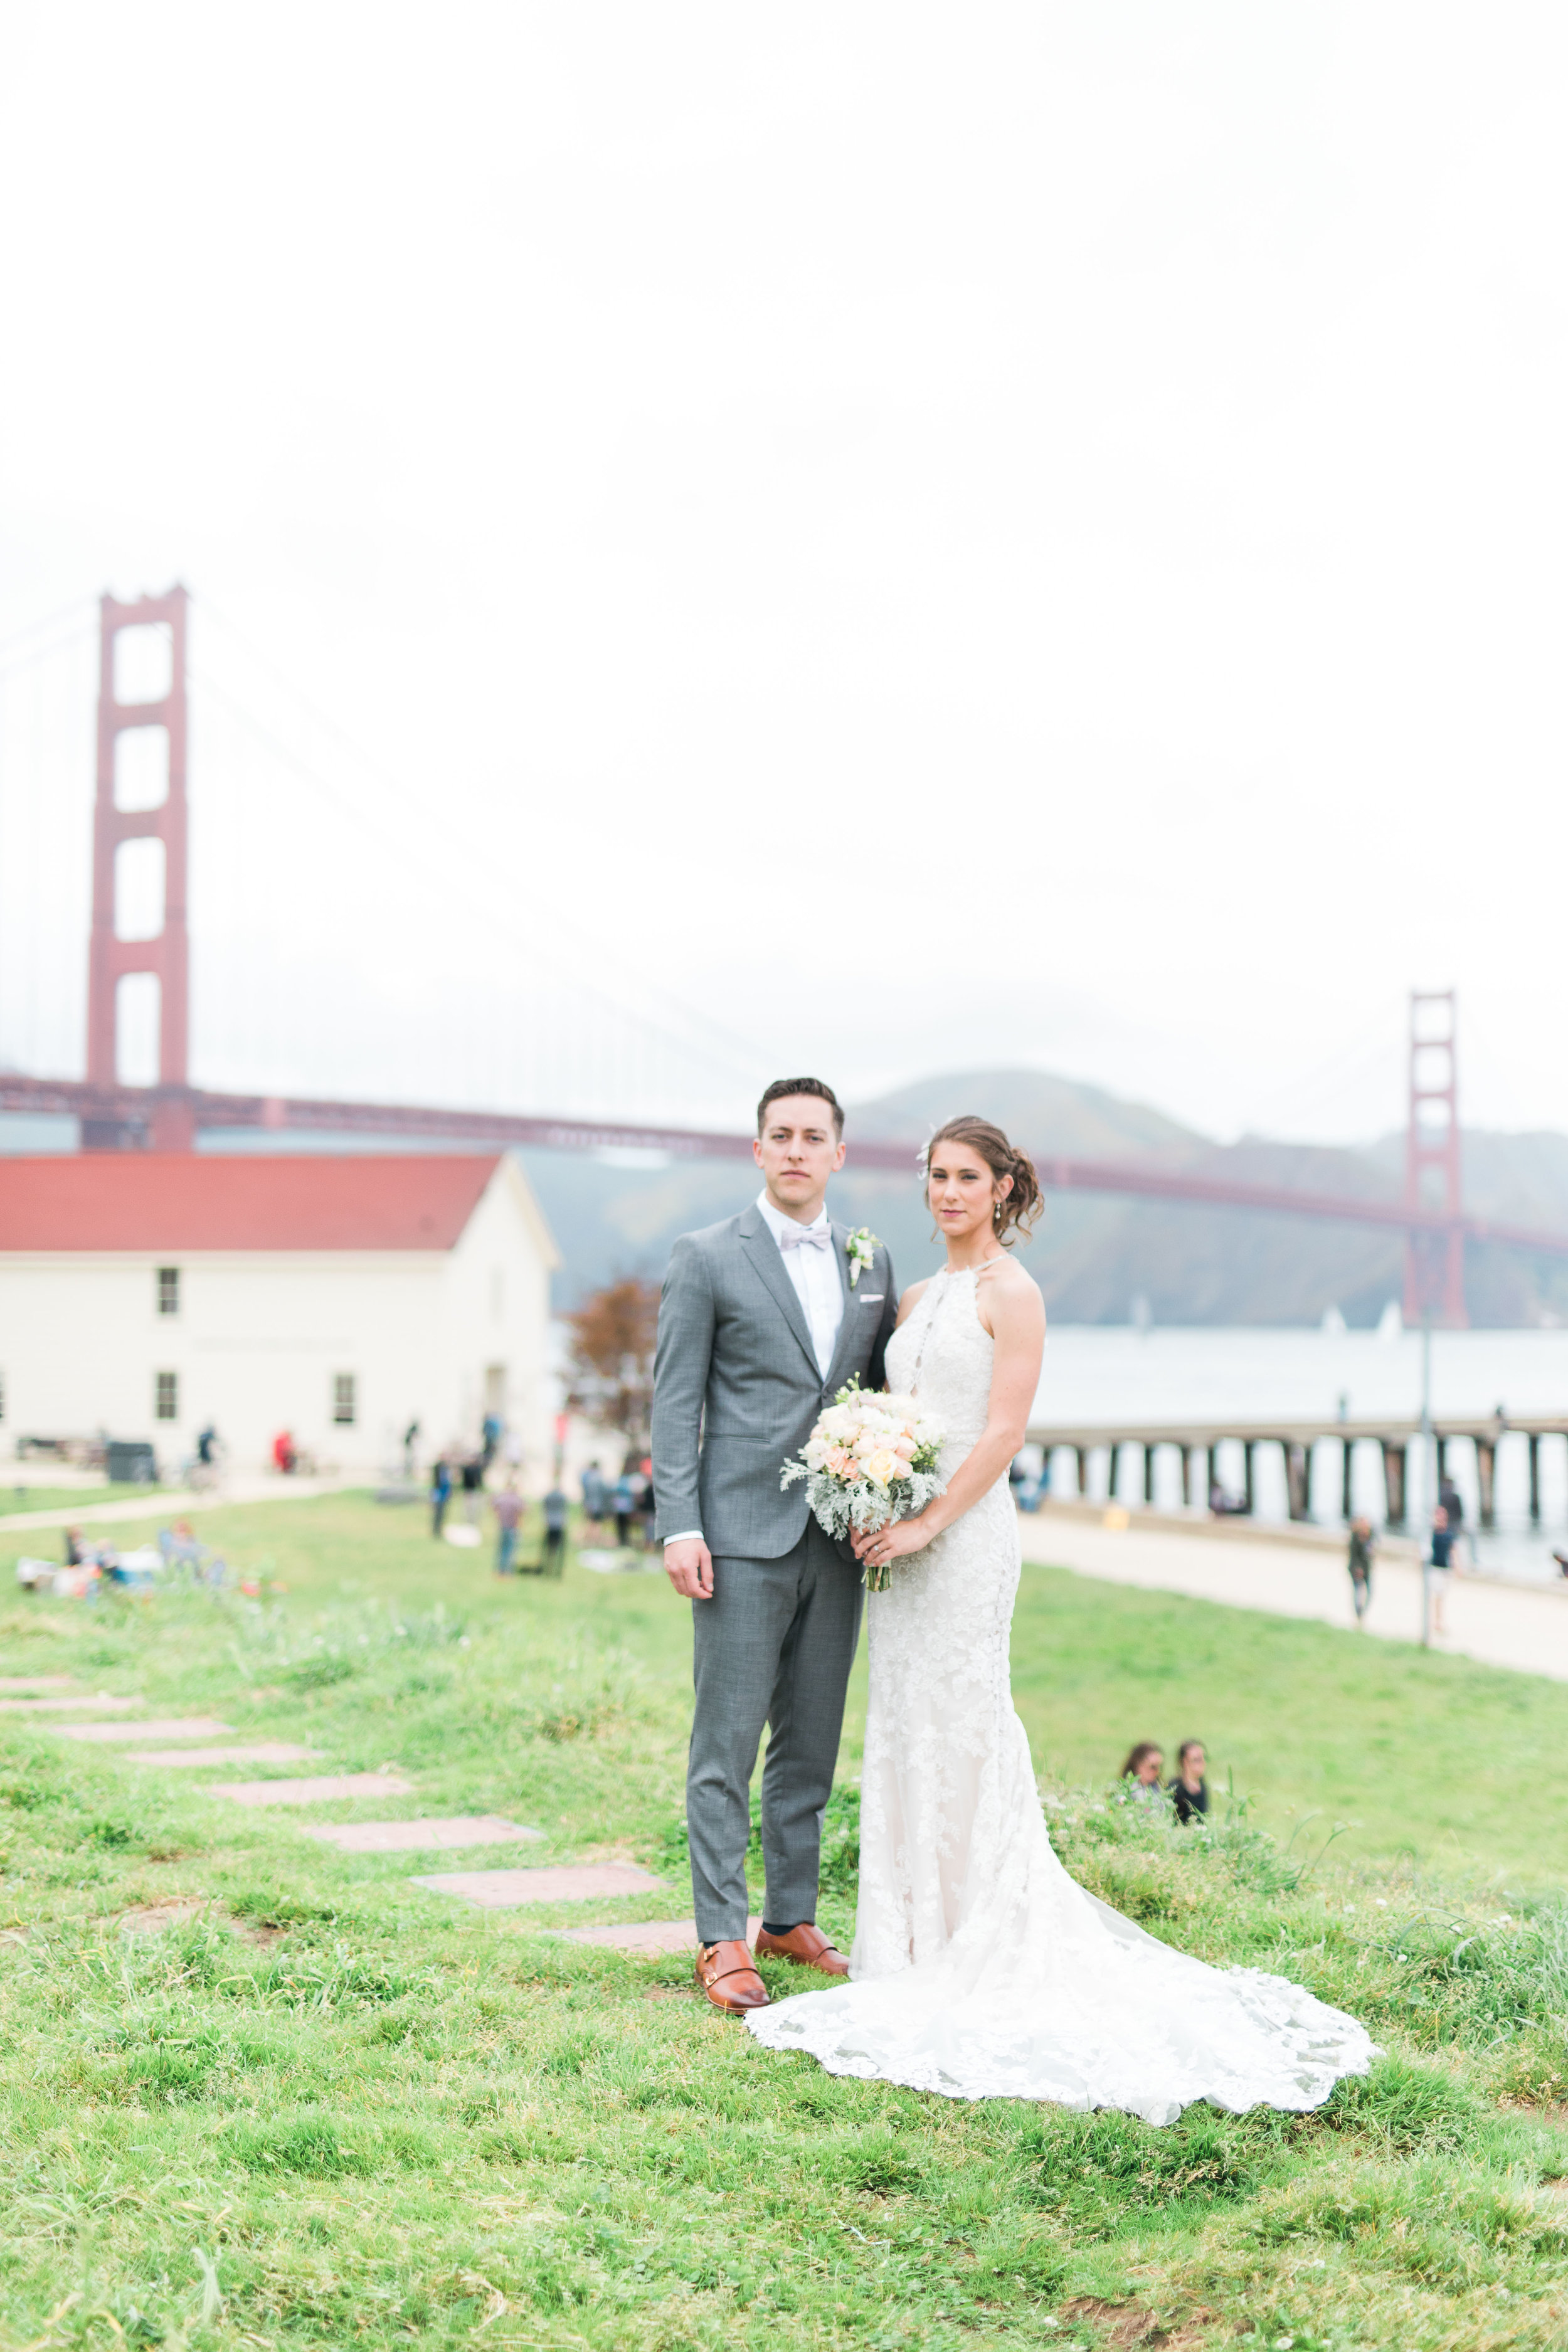 Best Engagement Photo Locations in SF - Crissy Field Engagement Photos by JBJ Pictures (17).jpg